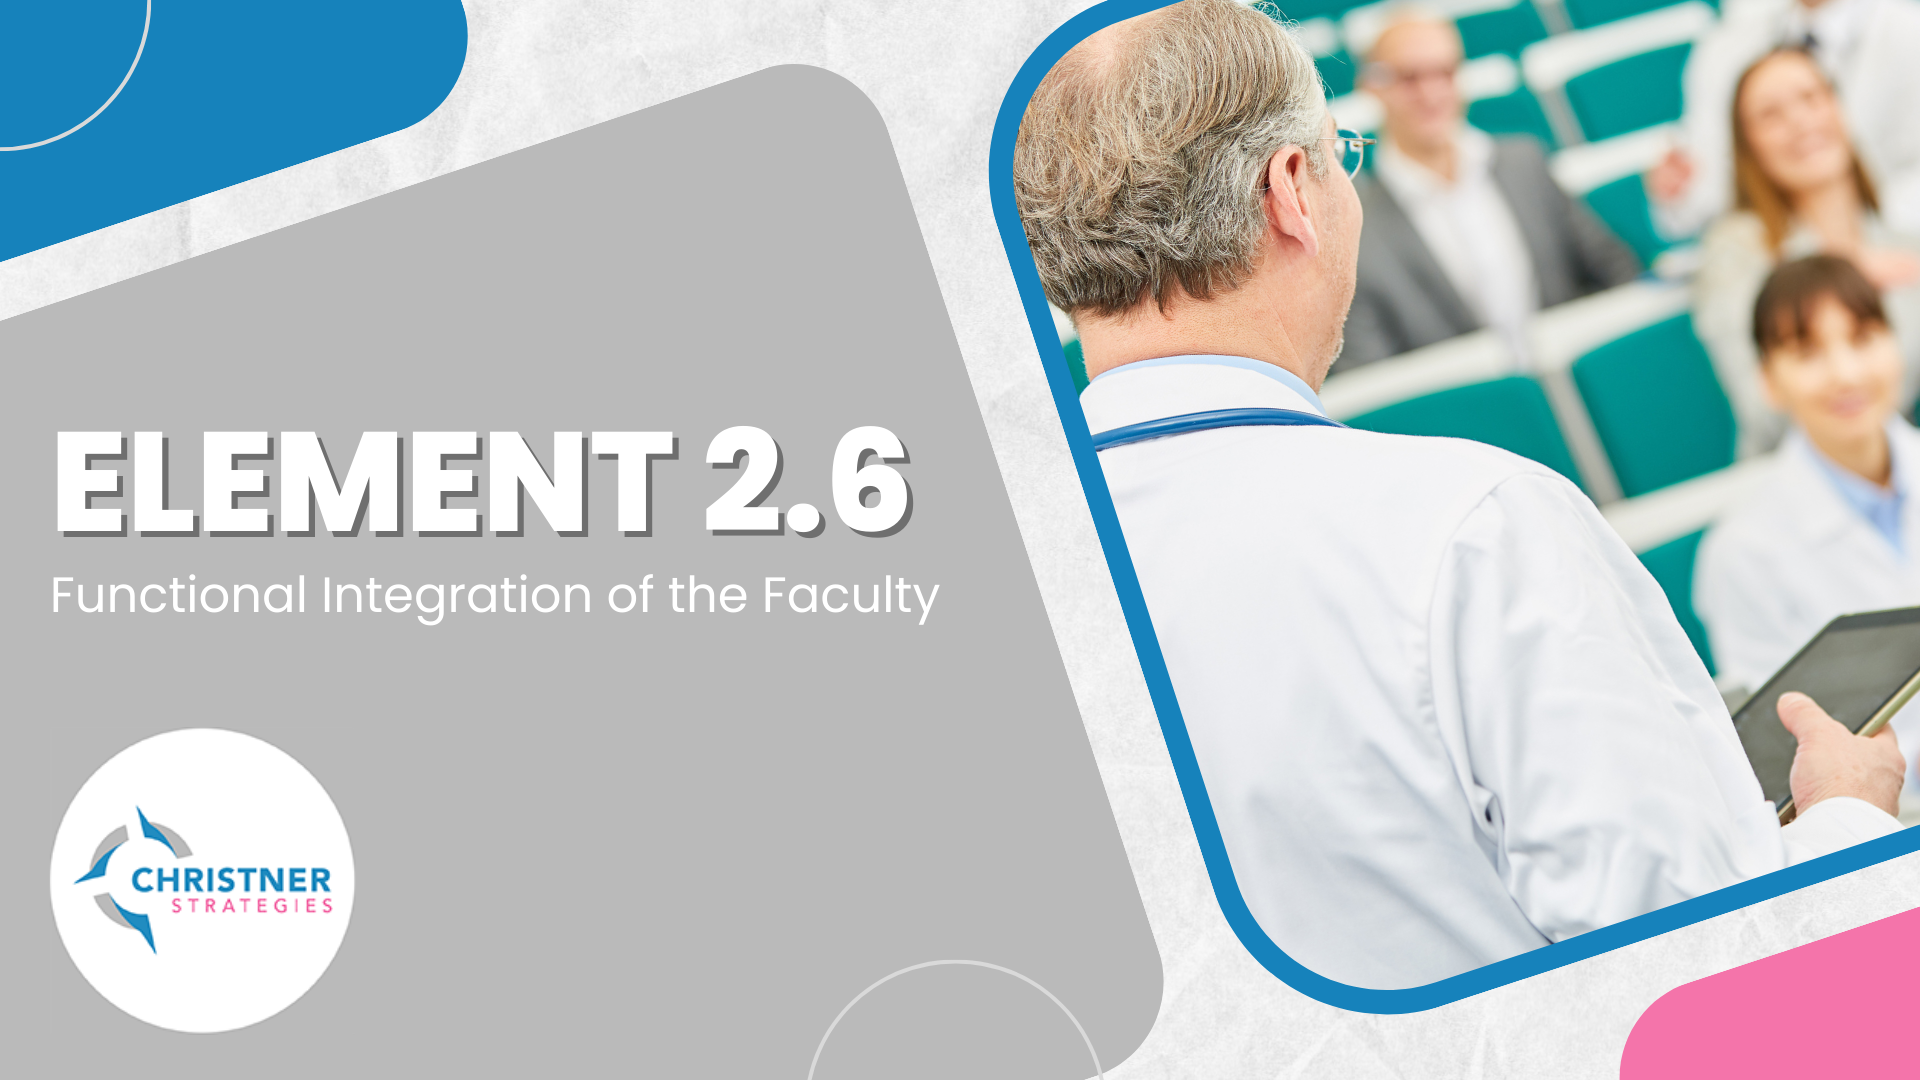 LCME Element 2.6 - Functional Integration of the Faculty